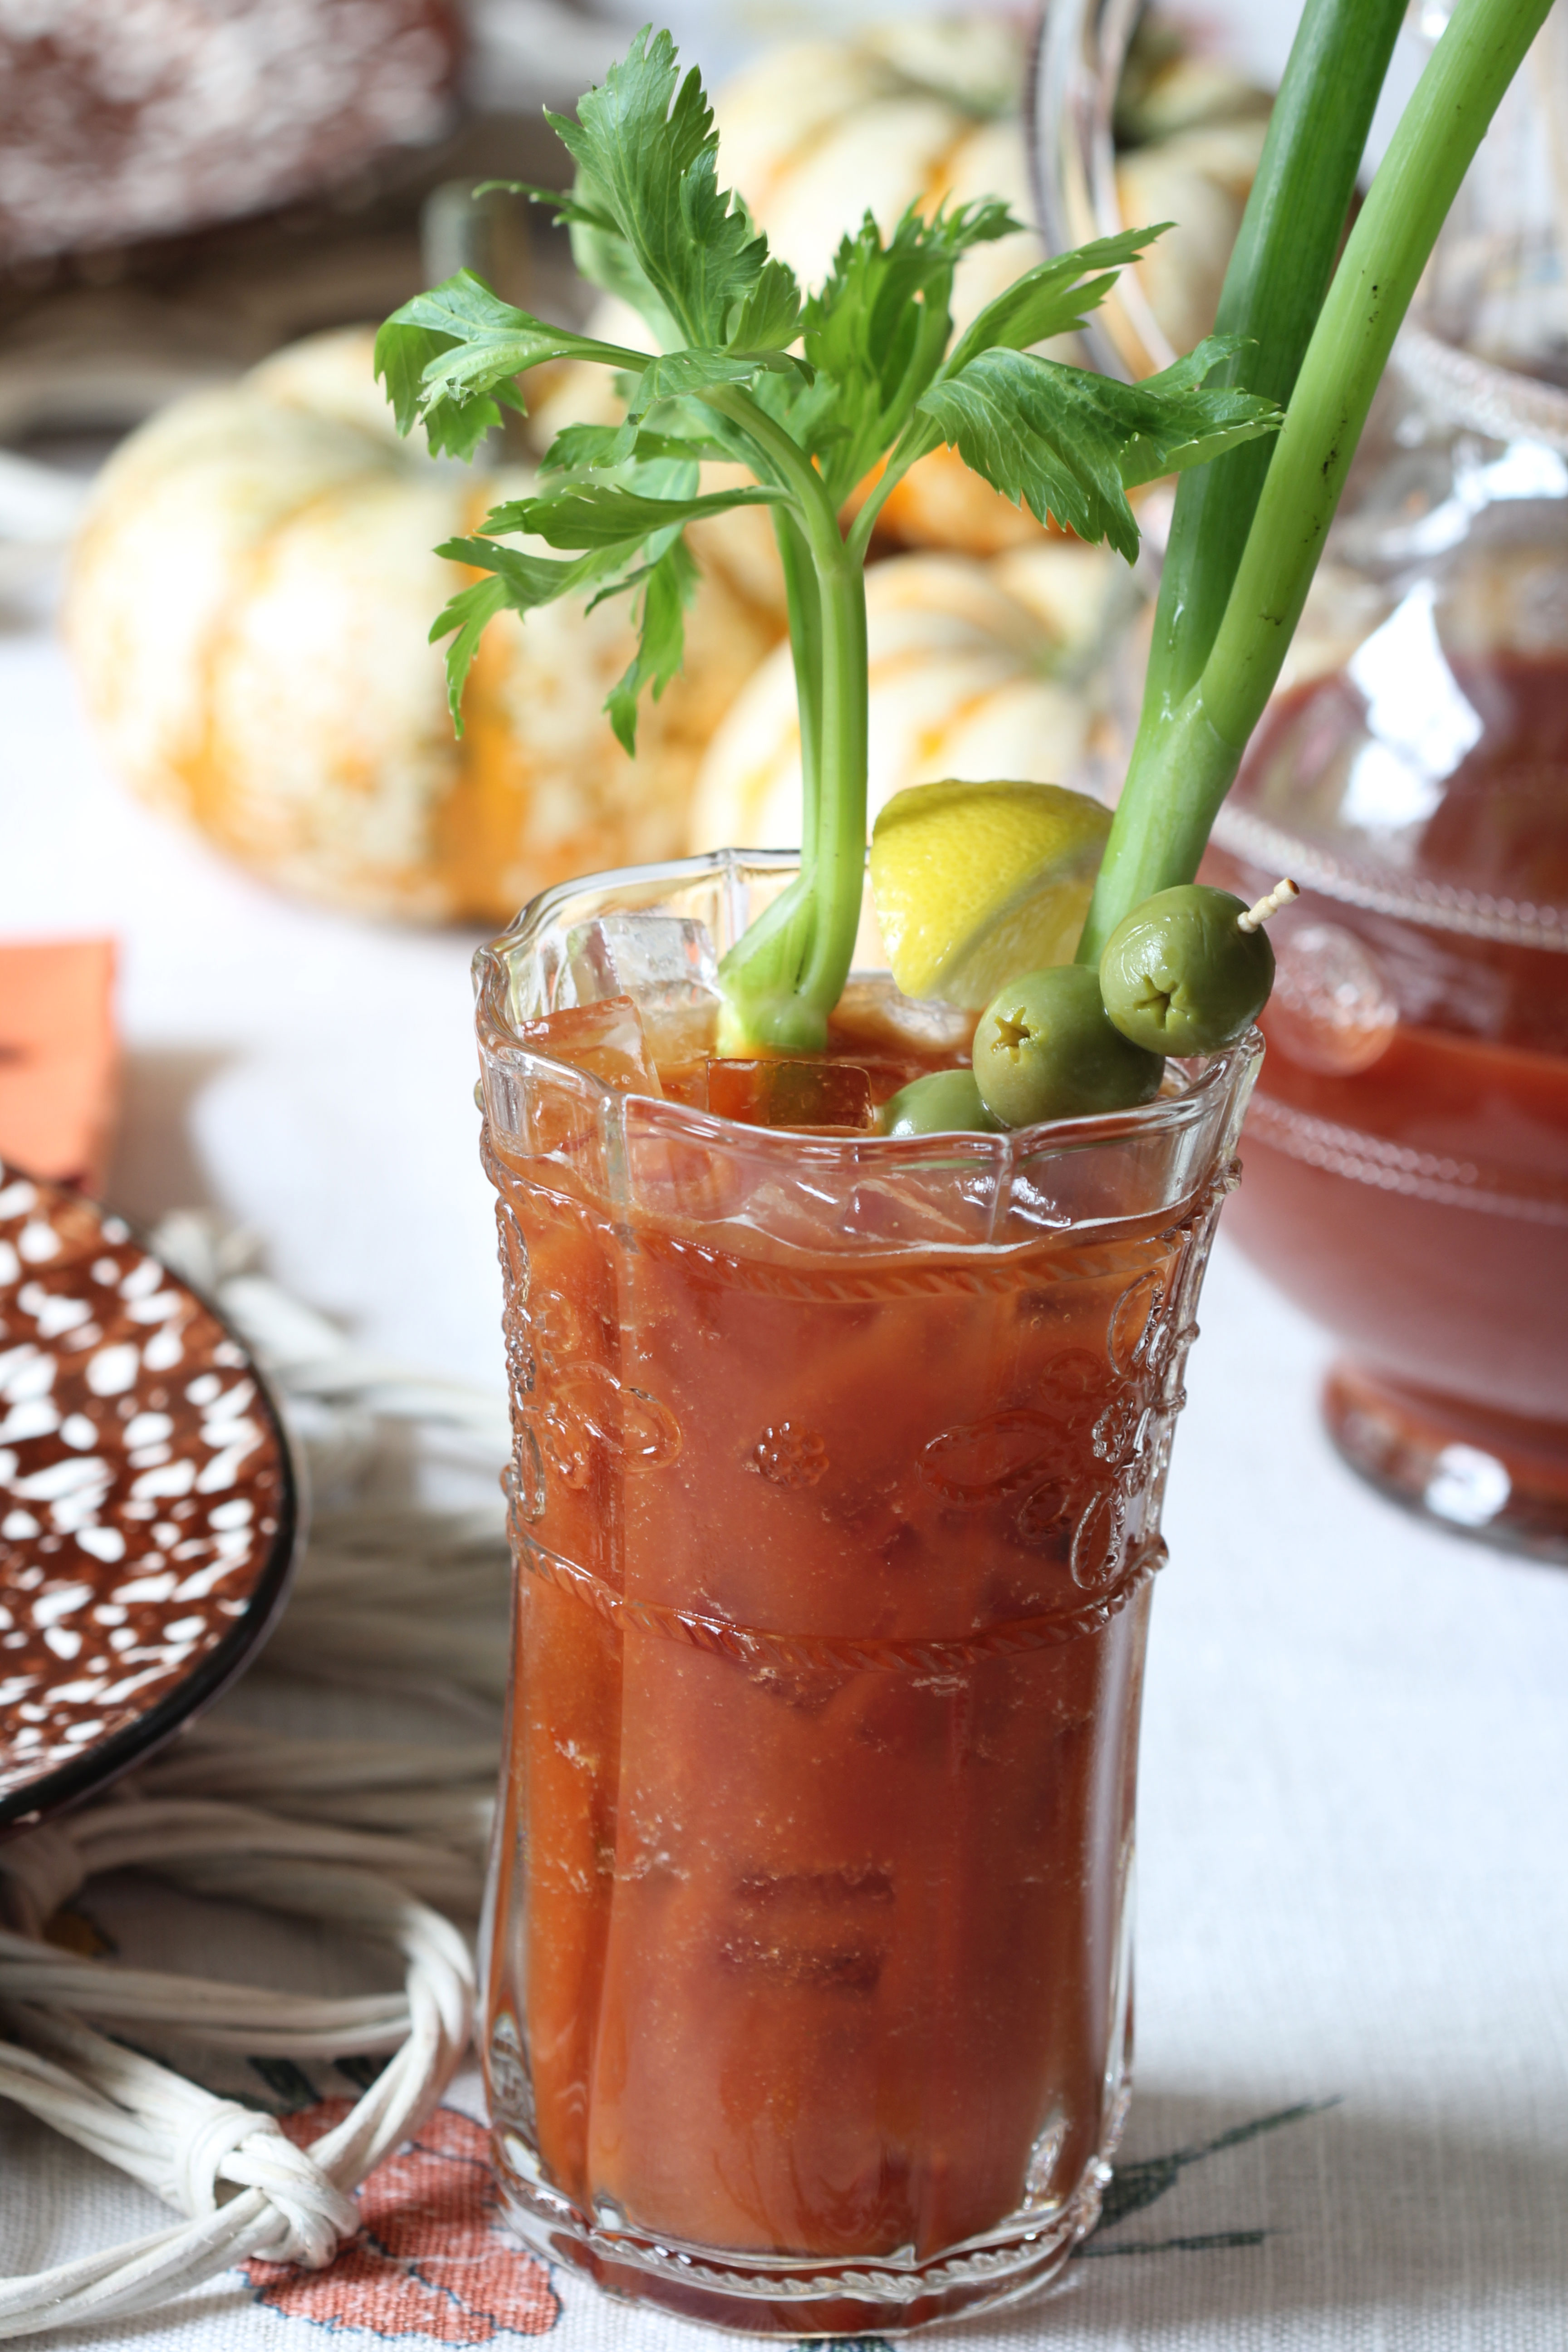 Nothing says Weekend Brunch better than a round of fresh Bloody Mary's with a garnish of celery, olives and lemon. 